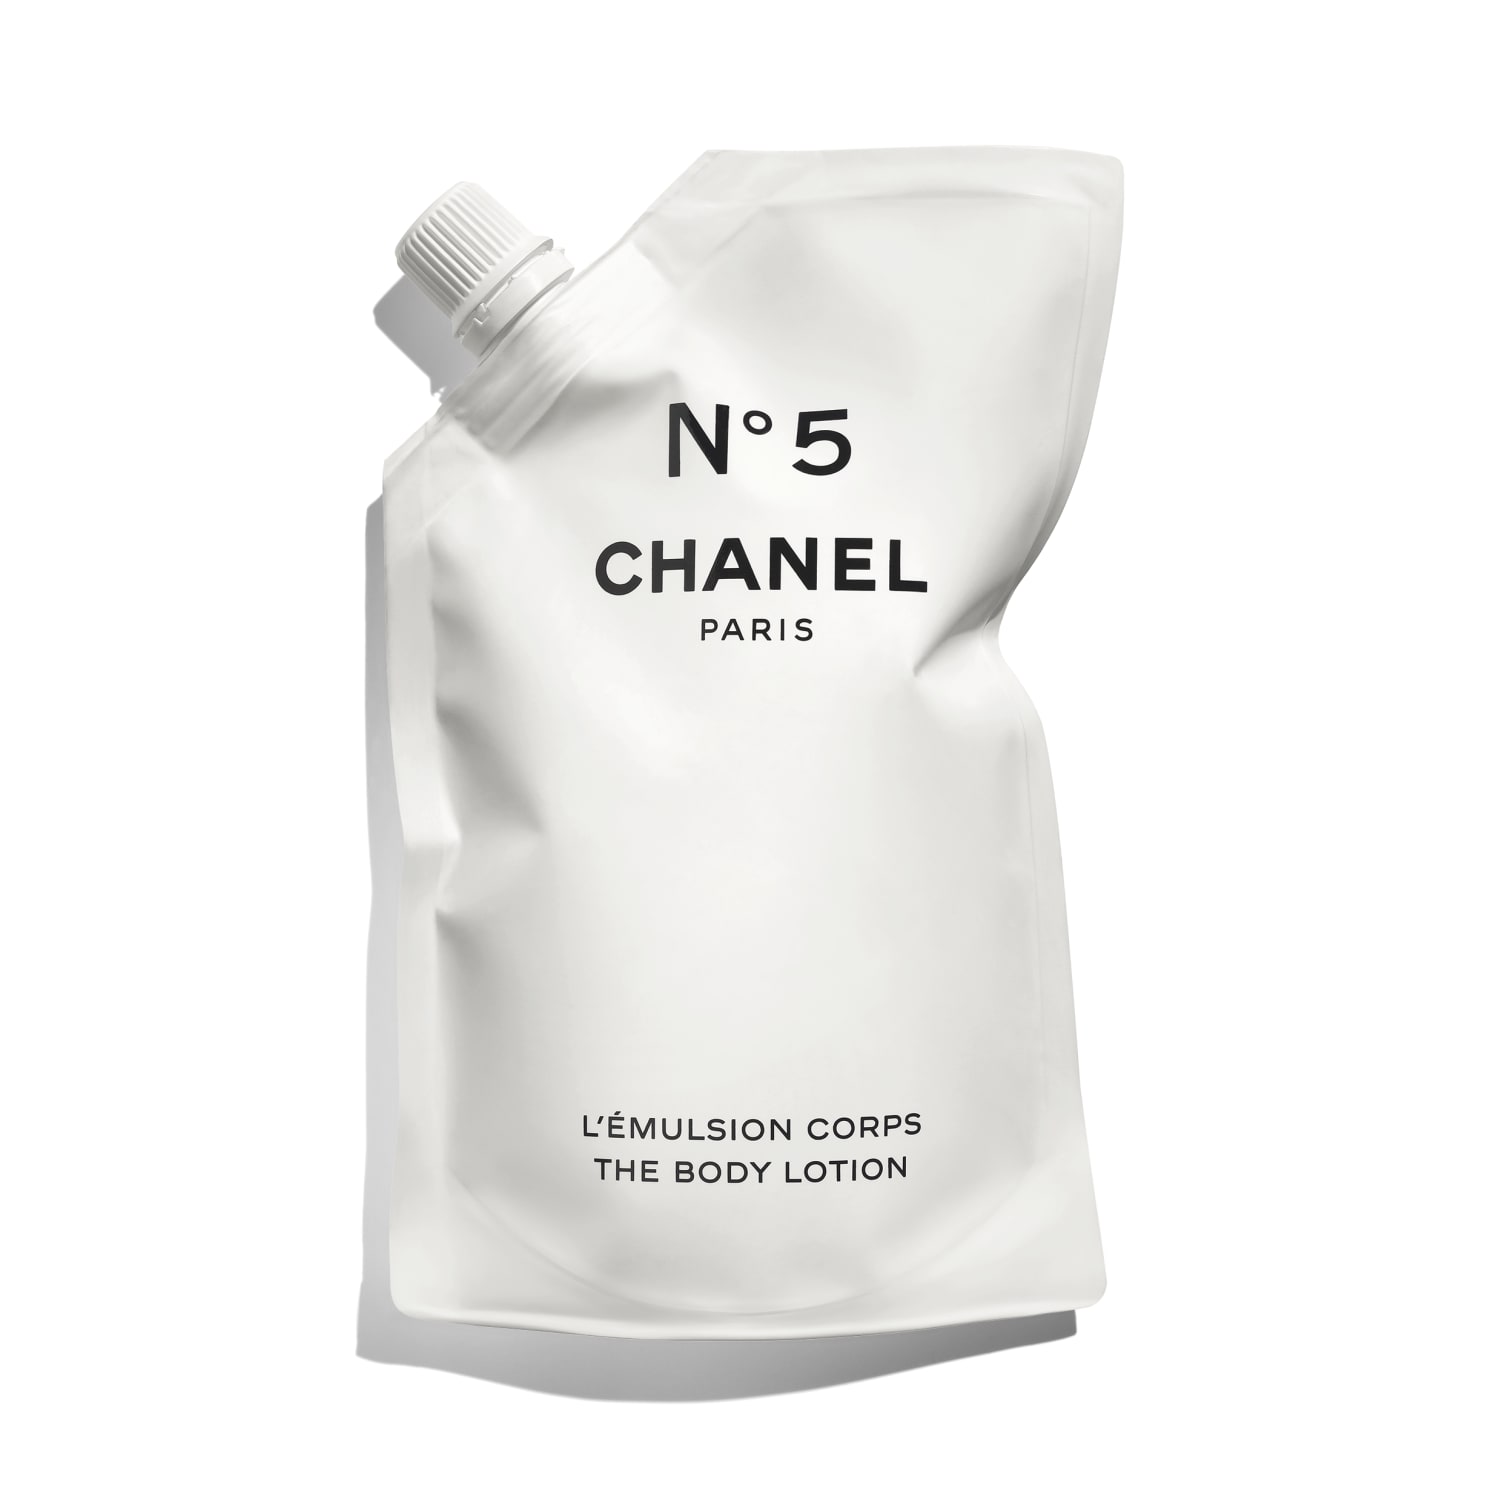 CHANEL N°5 FACTORY COLLECTION. THE BODY OIL 250ml. LIMITED SUMMER 2021